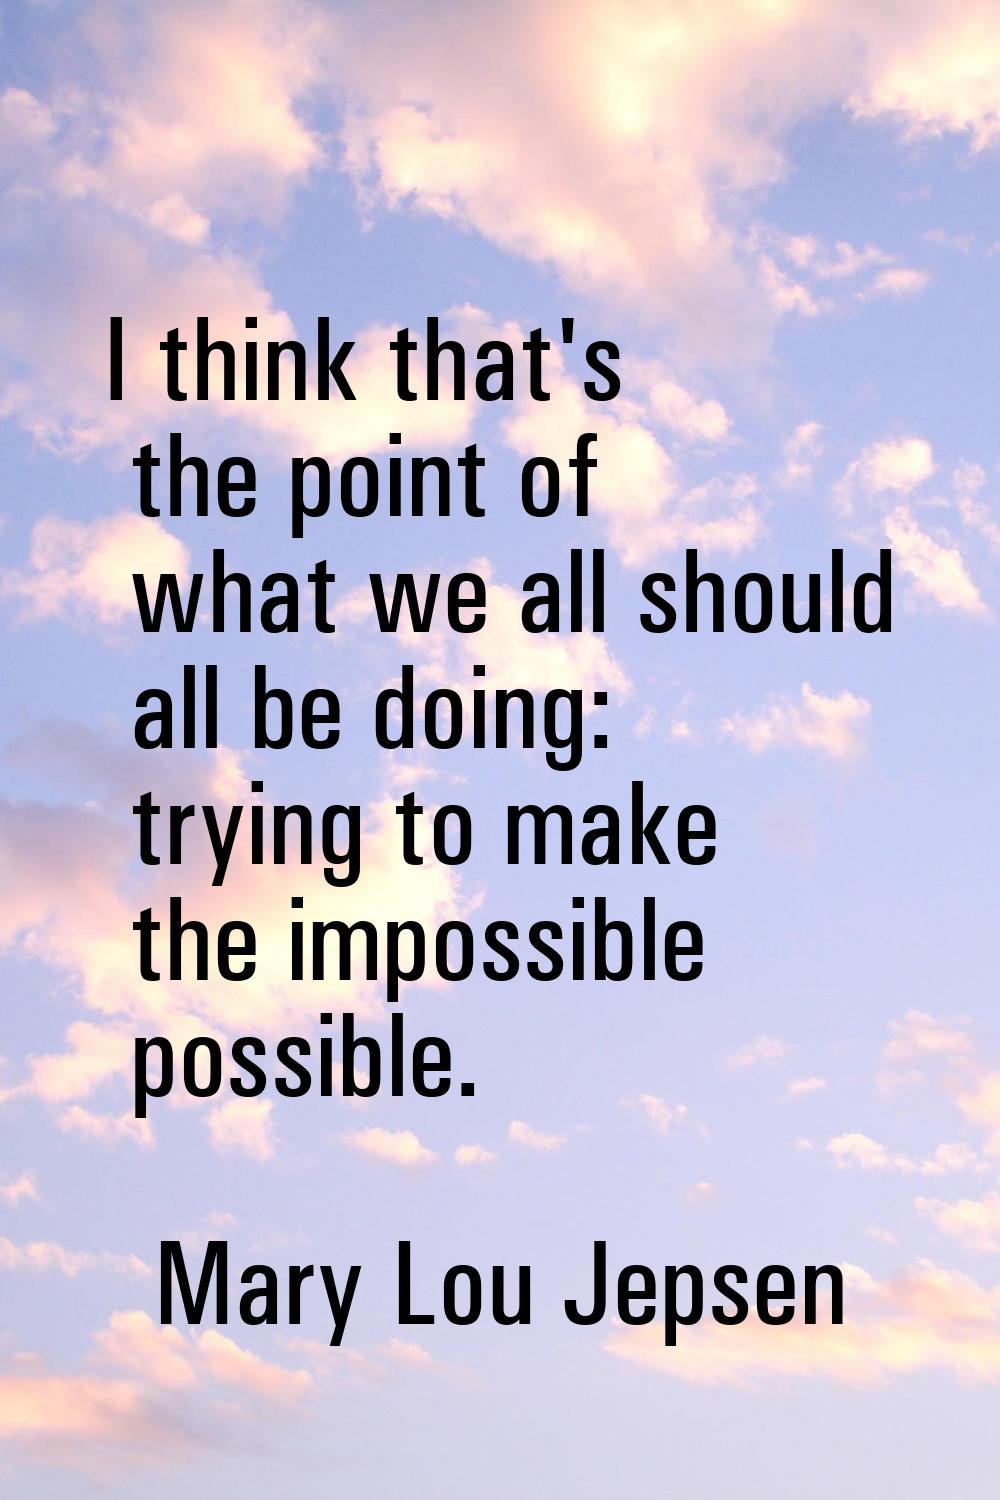 I think that's the point of what we all should all be doing: trying to make the impossible possible